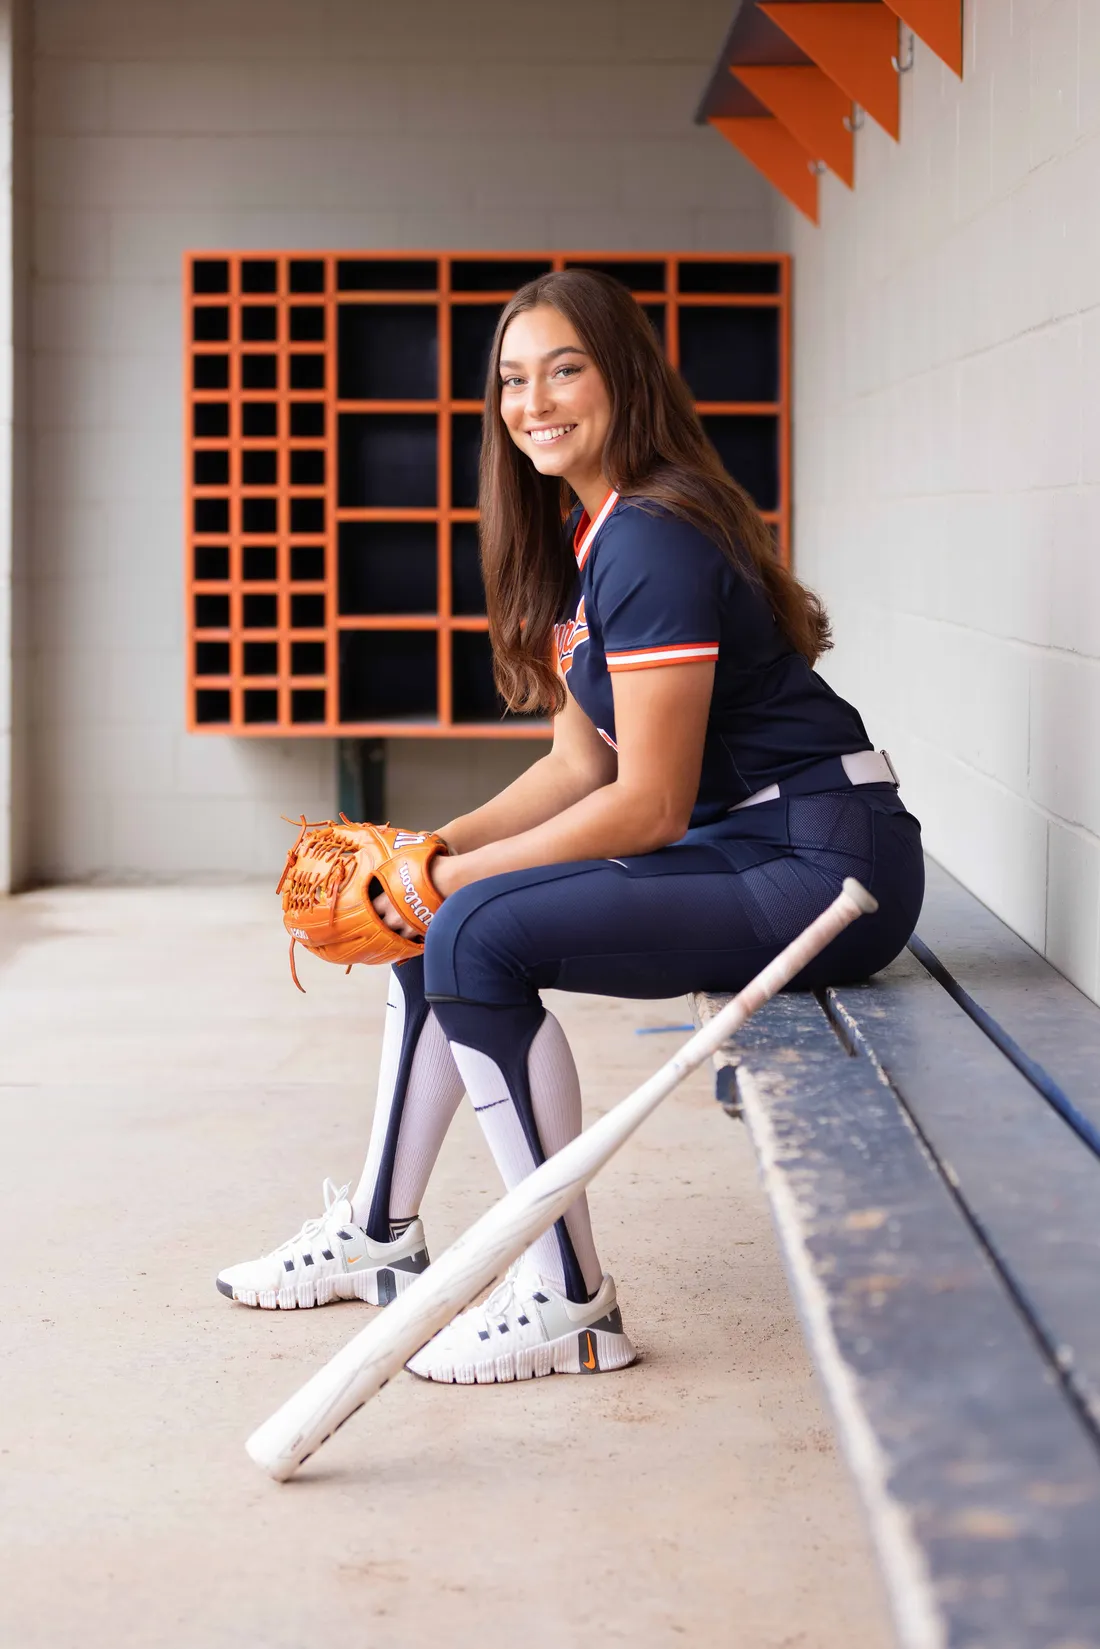 Olivia Pess ’24 smiling and sitting with glove and bat.